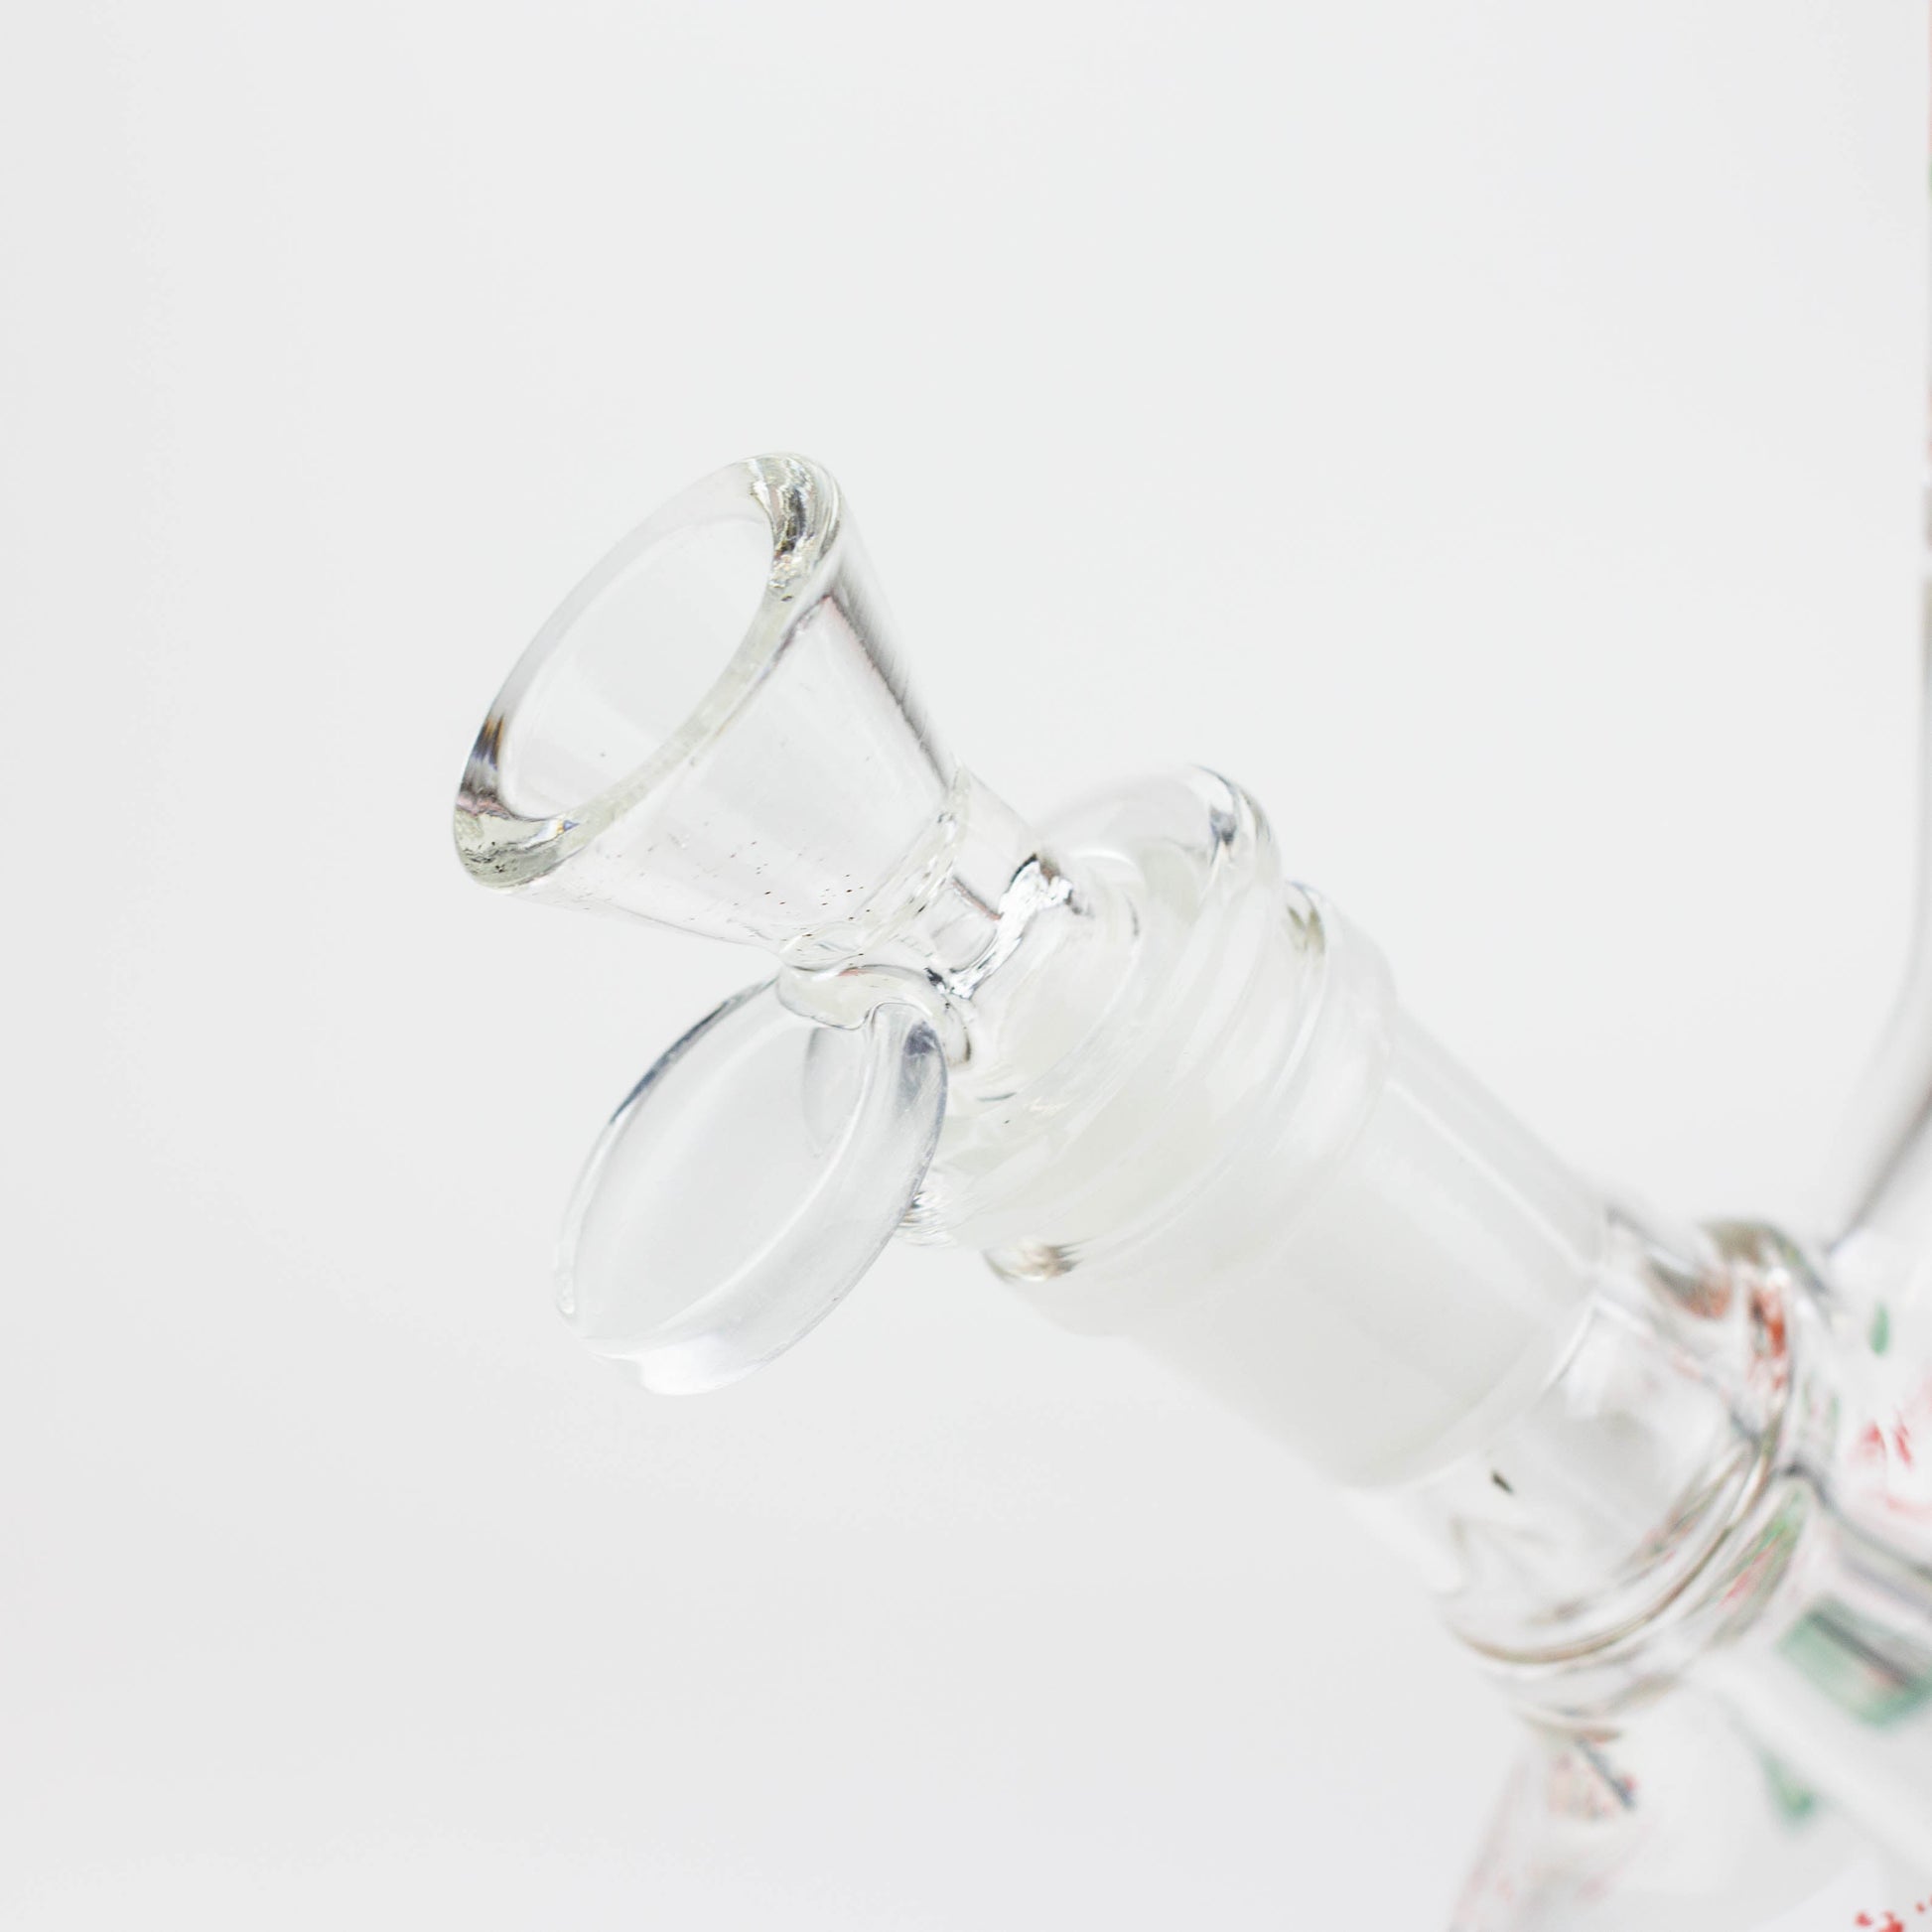 10" RM decal Glow in the dark glass water bong_4